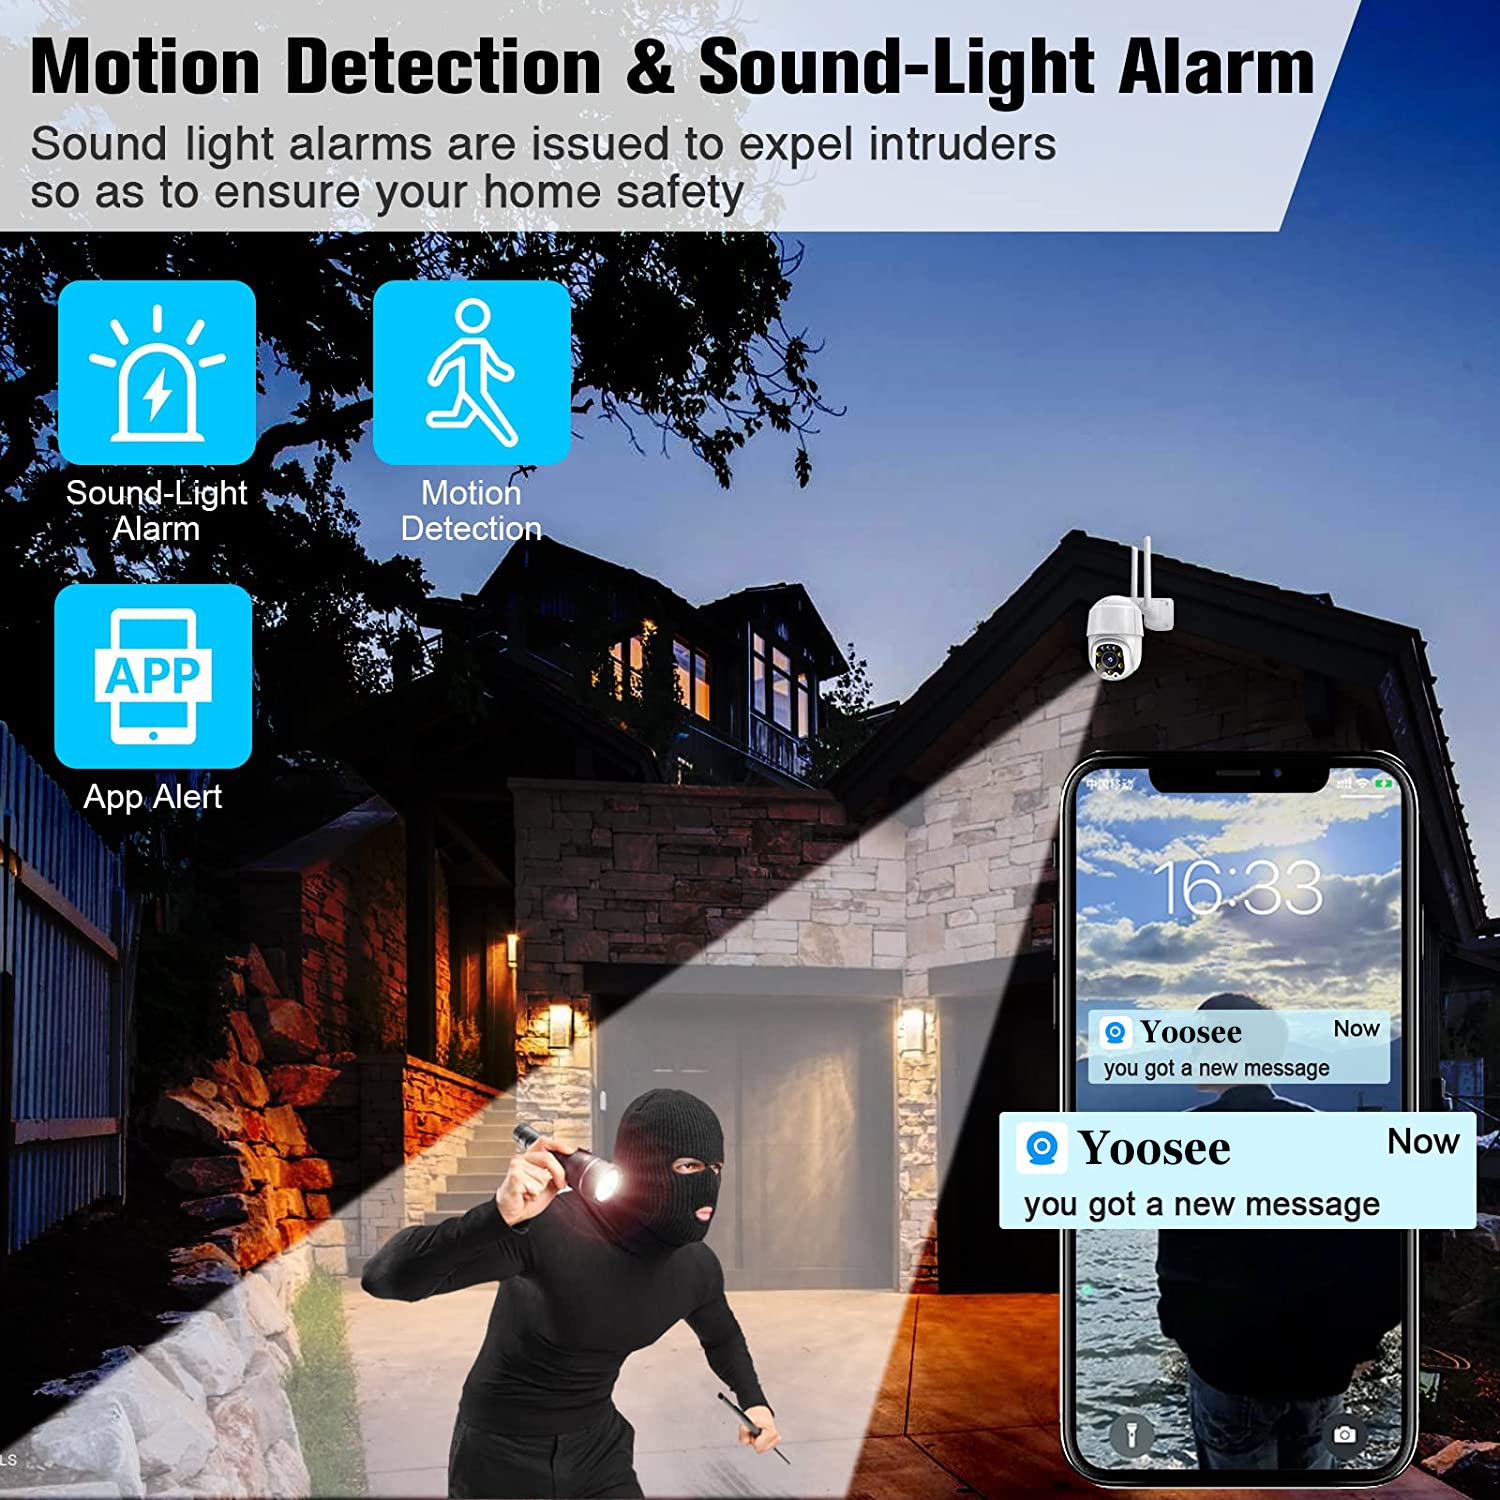 Security-Cameras-3MP-Security-Camera-WiFi-Camera-Outdoor-Home-Security-Camera-with-Spotlight-Night-Vision-Alarm-Remote-Access-Motion-Detection-Waterproof-2-Way-Audio-9